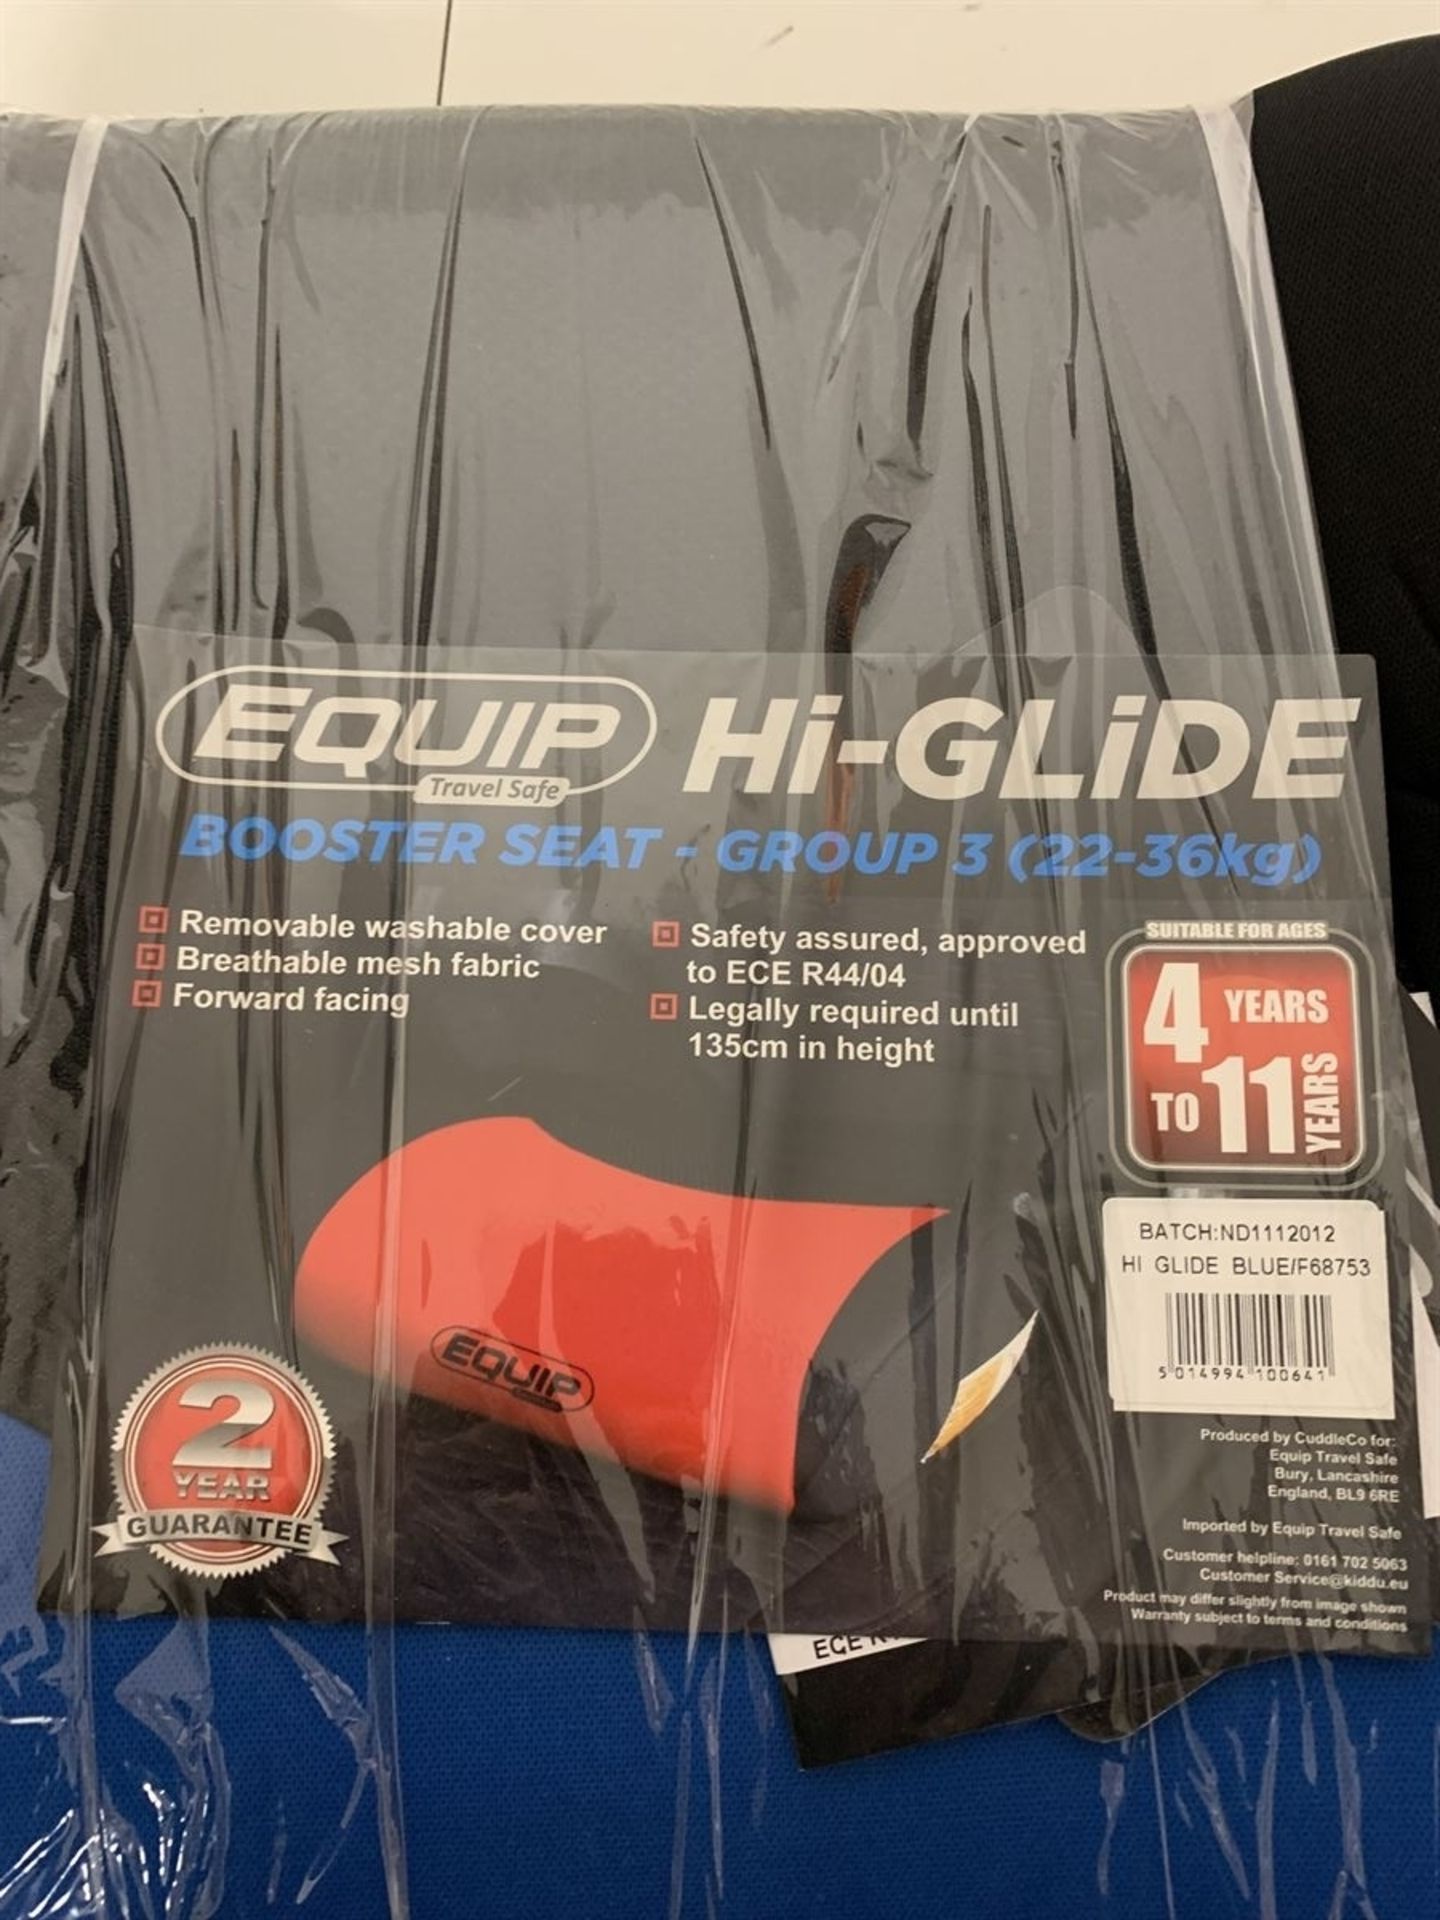 New - equip hi glide car seat (not boxed) - Image 3 of 3